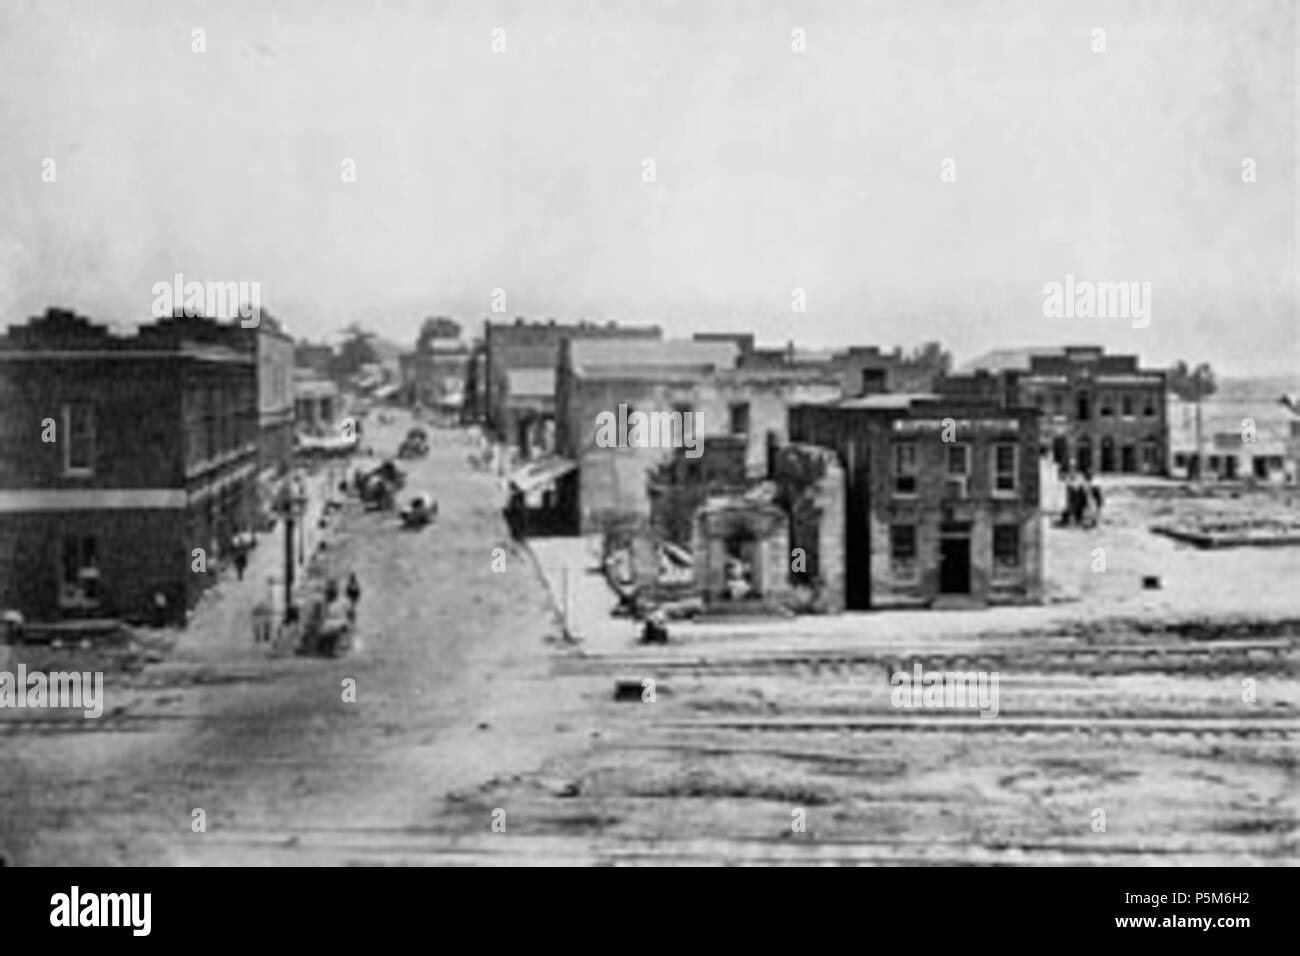 N/A. An Atlanta street, showing the destruction inflicted on the city by Union general William T. Sherman's troops, in 1864. .   George N. Barnard  (1819–1902)     Alternative names G. N. Barnard; George Barnard; George Norman Barnard  Description American photographer and daguerreotypist Best known for his album of sixty-one albumen prints in 'Photographic Views of Sherman's Campaign' (pub. 1866) documenting the battlefields after Sherman's march through the South.  Date of birth/death 23 December 1819 4 February 1902  Location of birth Coventry  Work location Oswego, New York City, Syracuse, Stock Photo